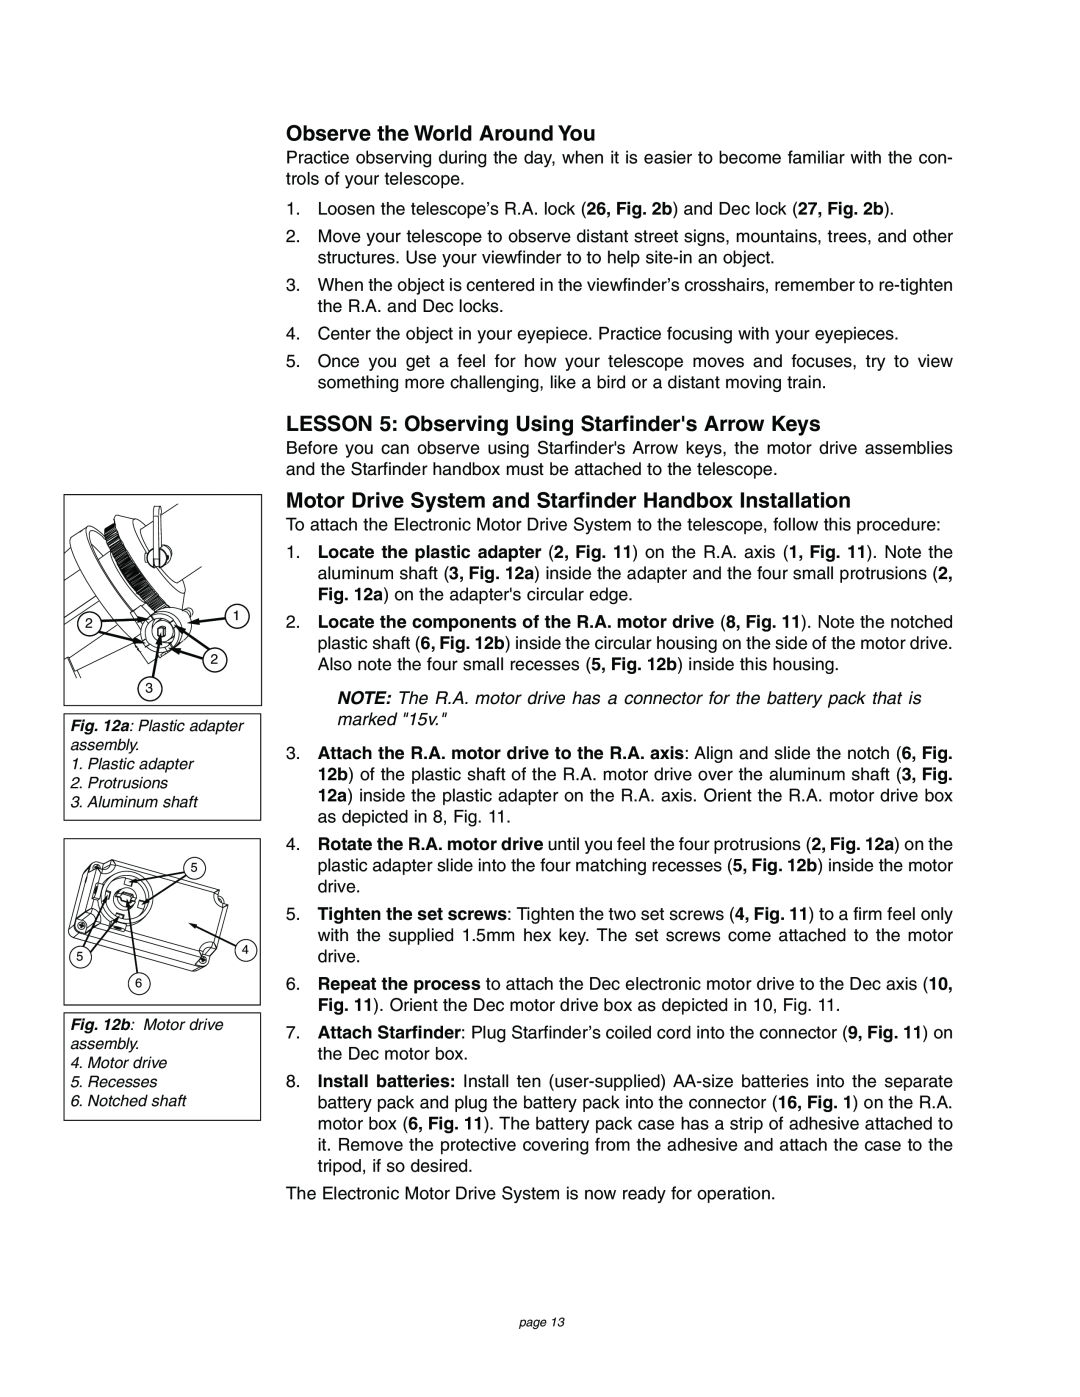 Meade 4504 instruction manual Observe the World Around You, LESSON 5 Observing Using Starfinders Arrow Keys 